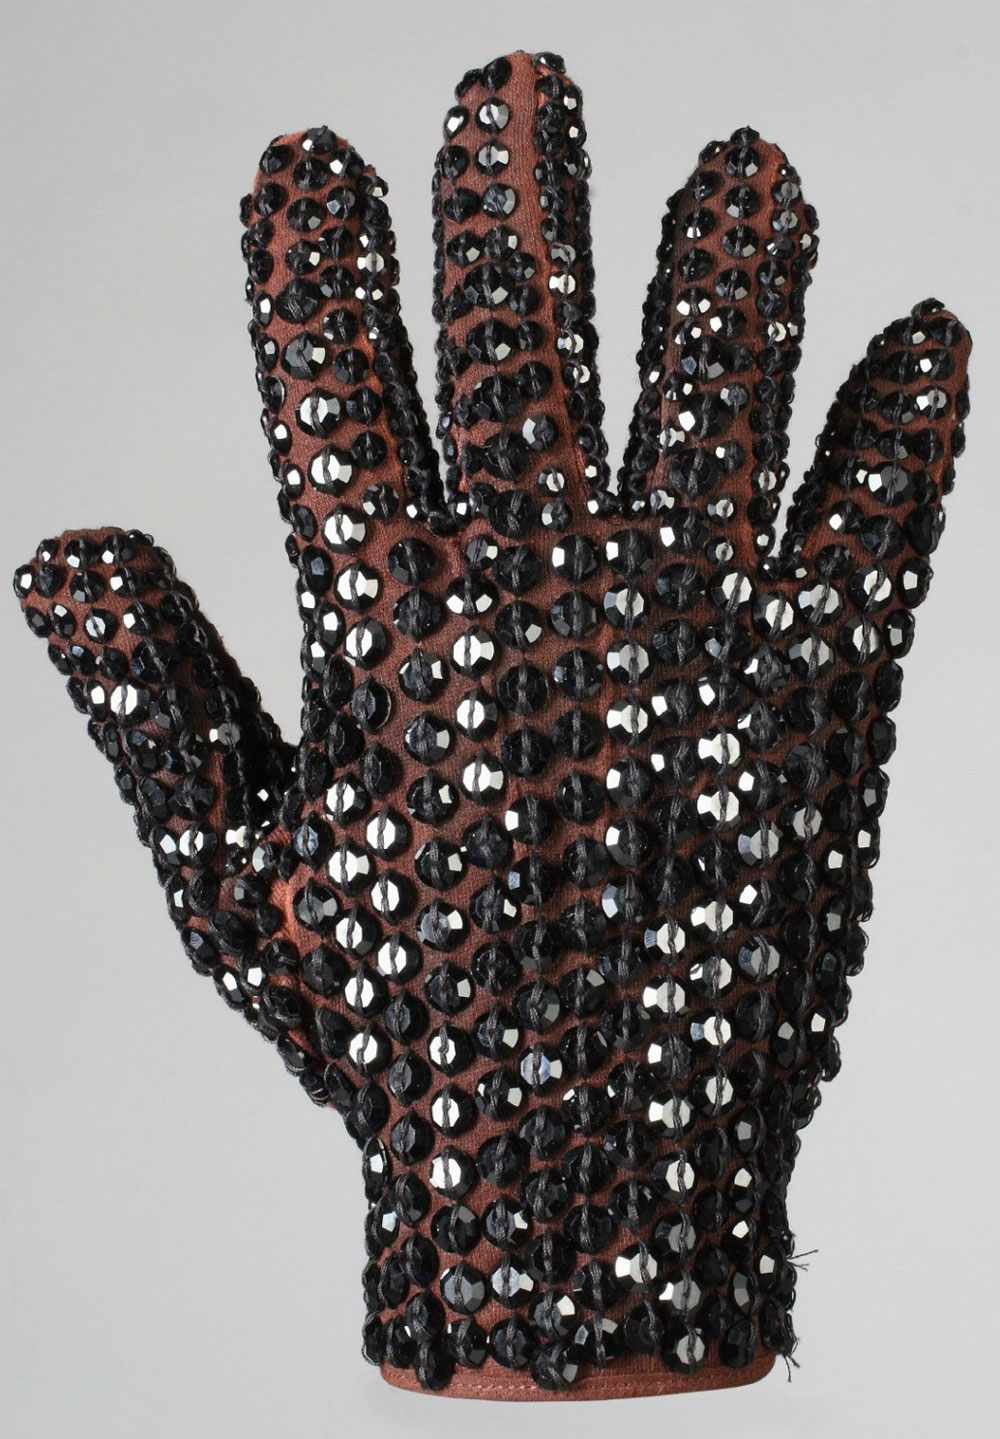 Michael Jackson's Thriller glove estimated to fetch $85,000 - Luxurylaunches